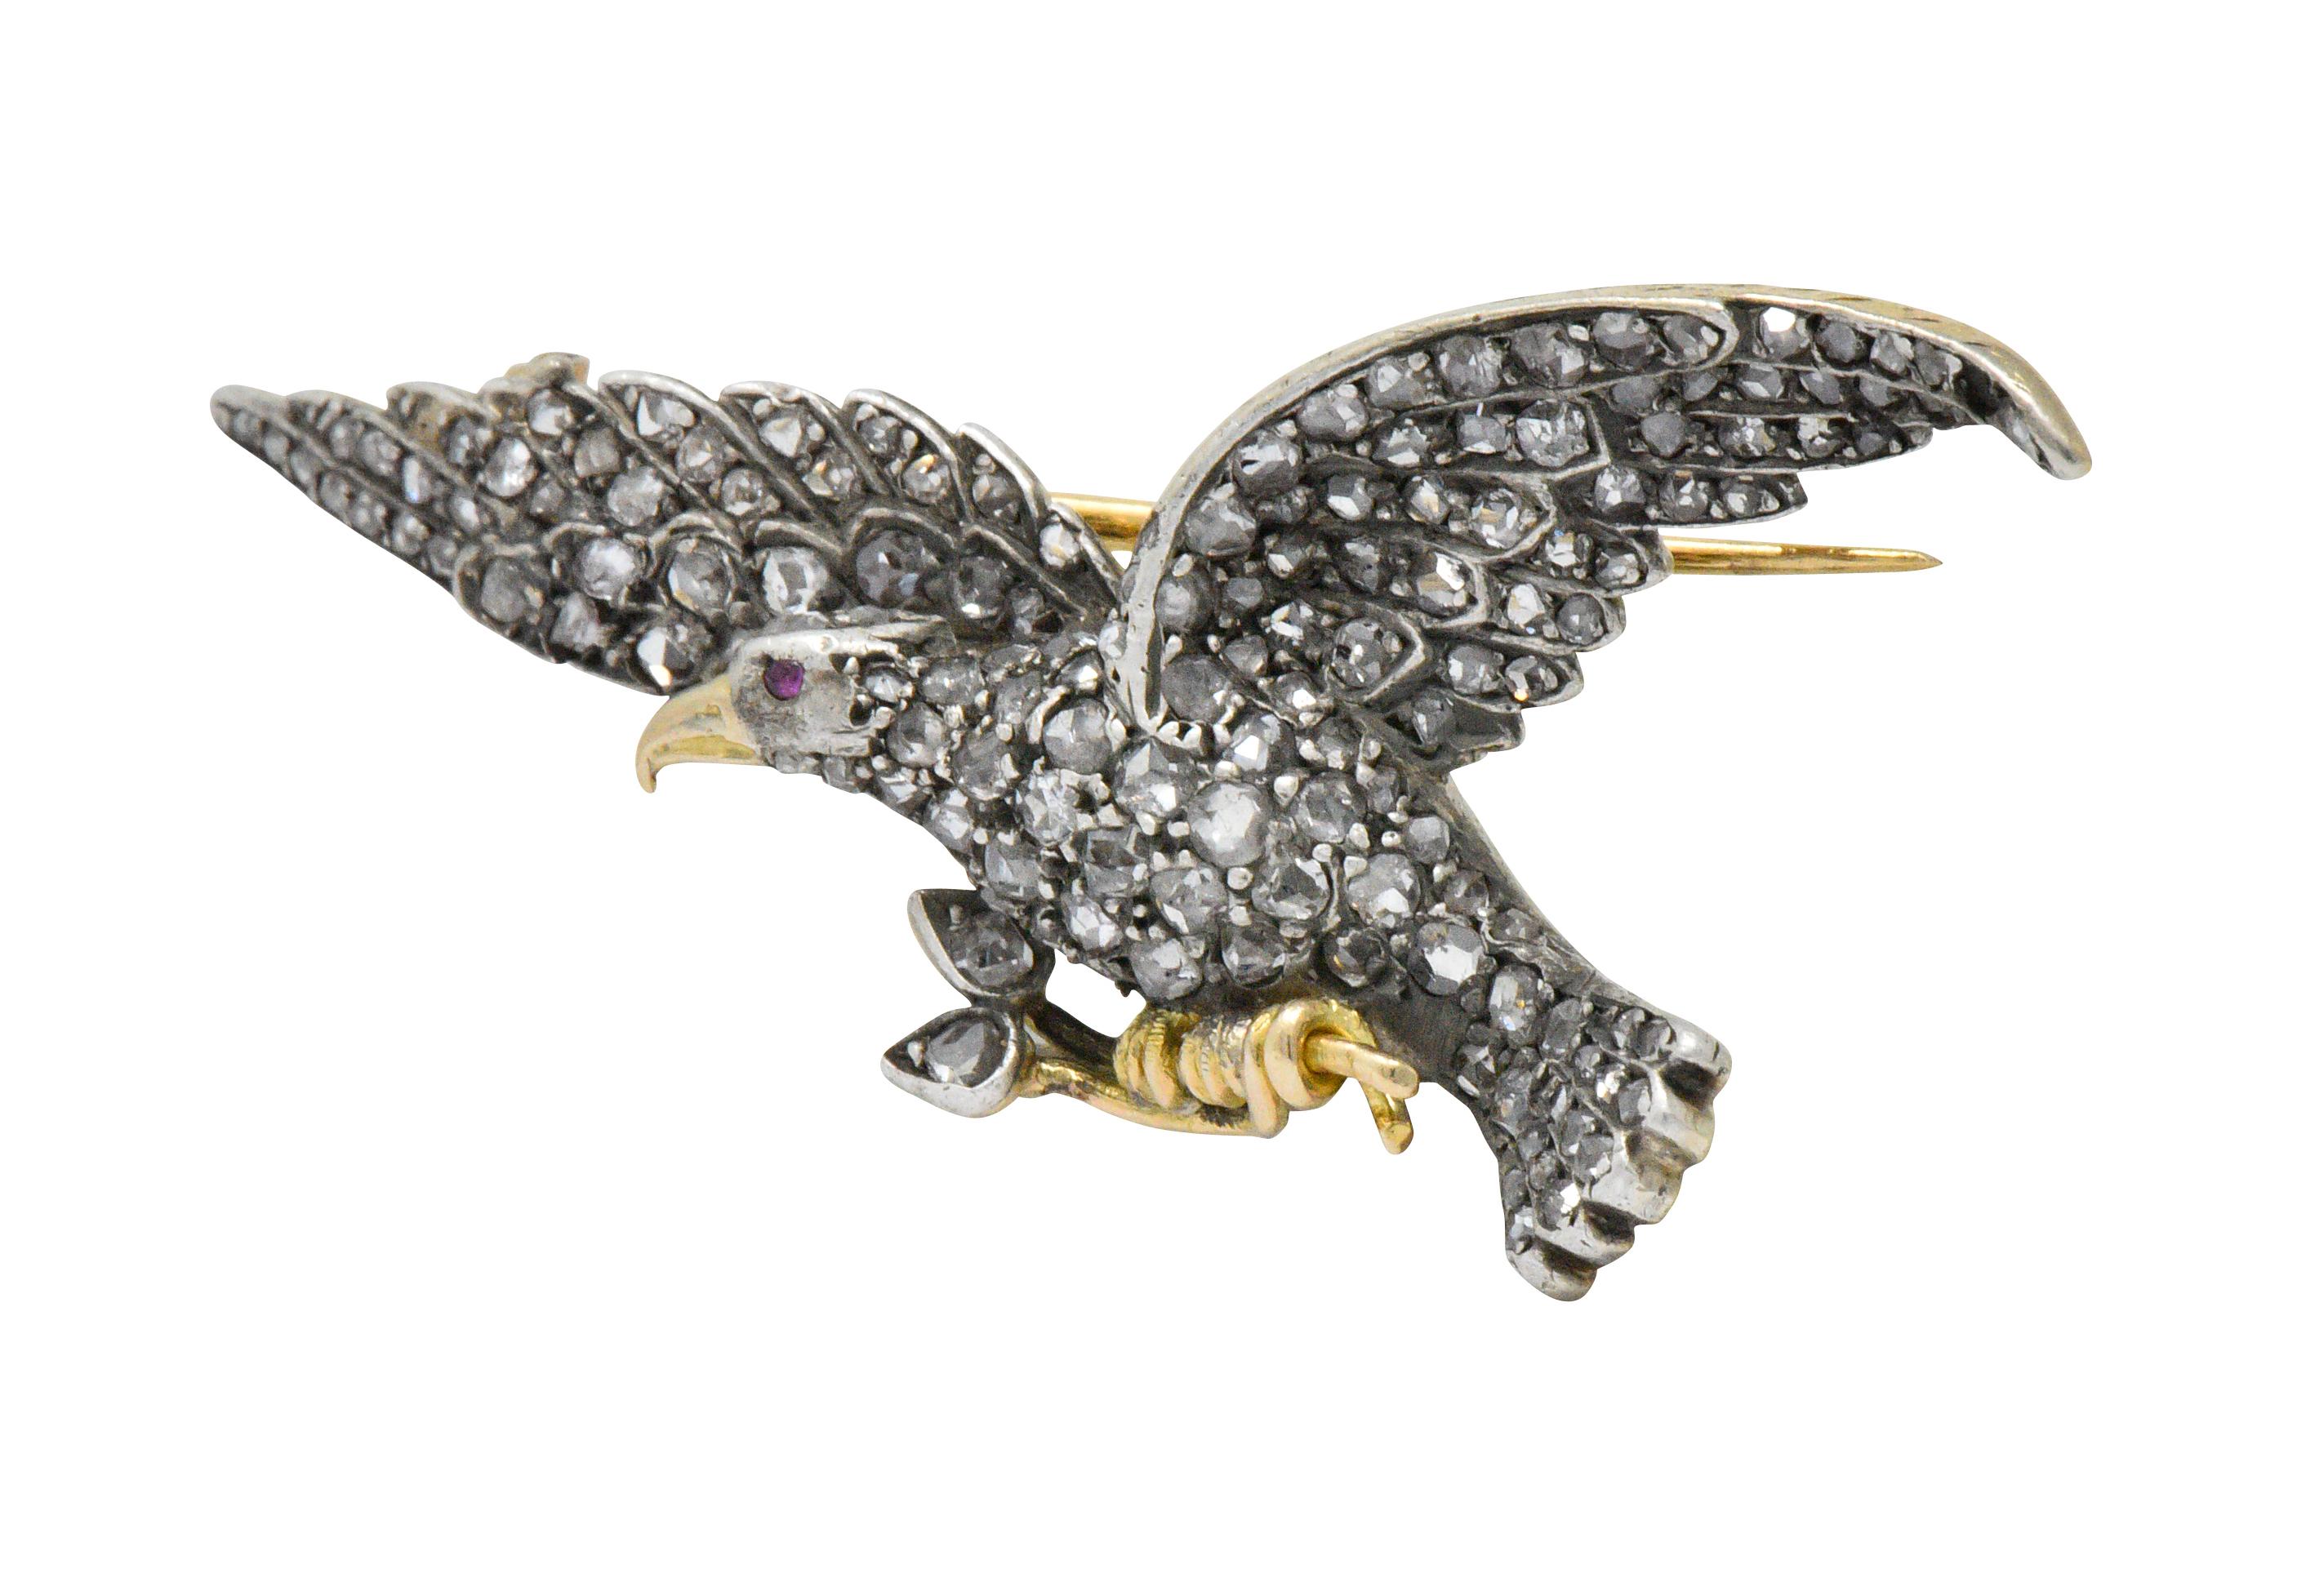 Featuring an eagle in mid-flight clutching flowers in his talons

Set throughout with rose cut diamonds weighing approximately 2.00 carats, G to J color and VS to I clarity and a ruby eye

Bright yellow gold beak and talons create striking